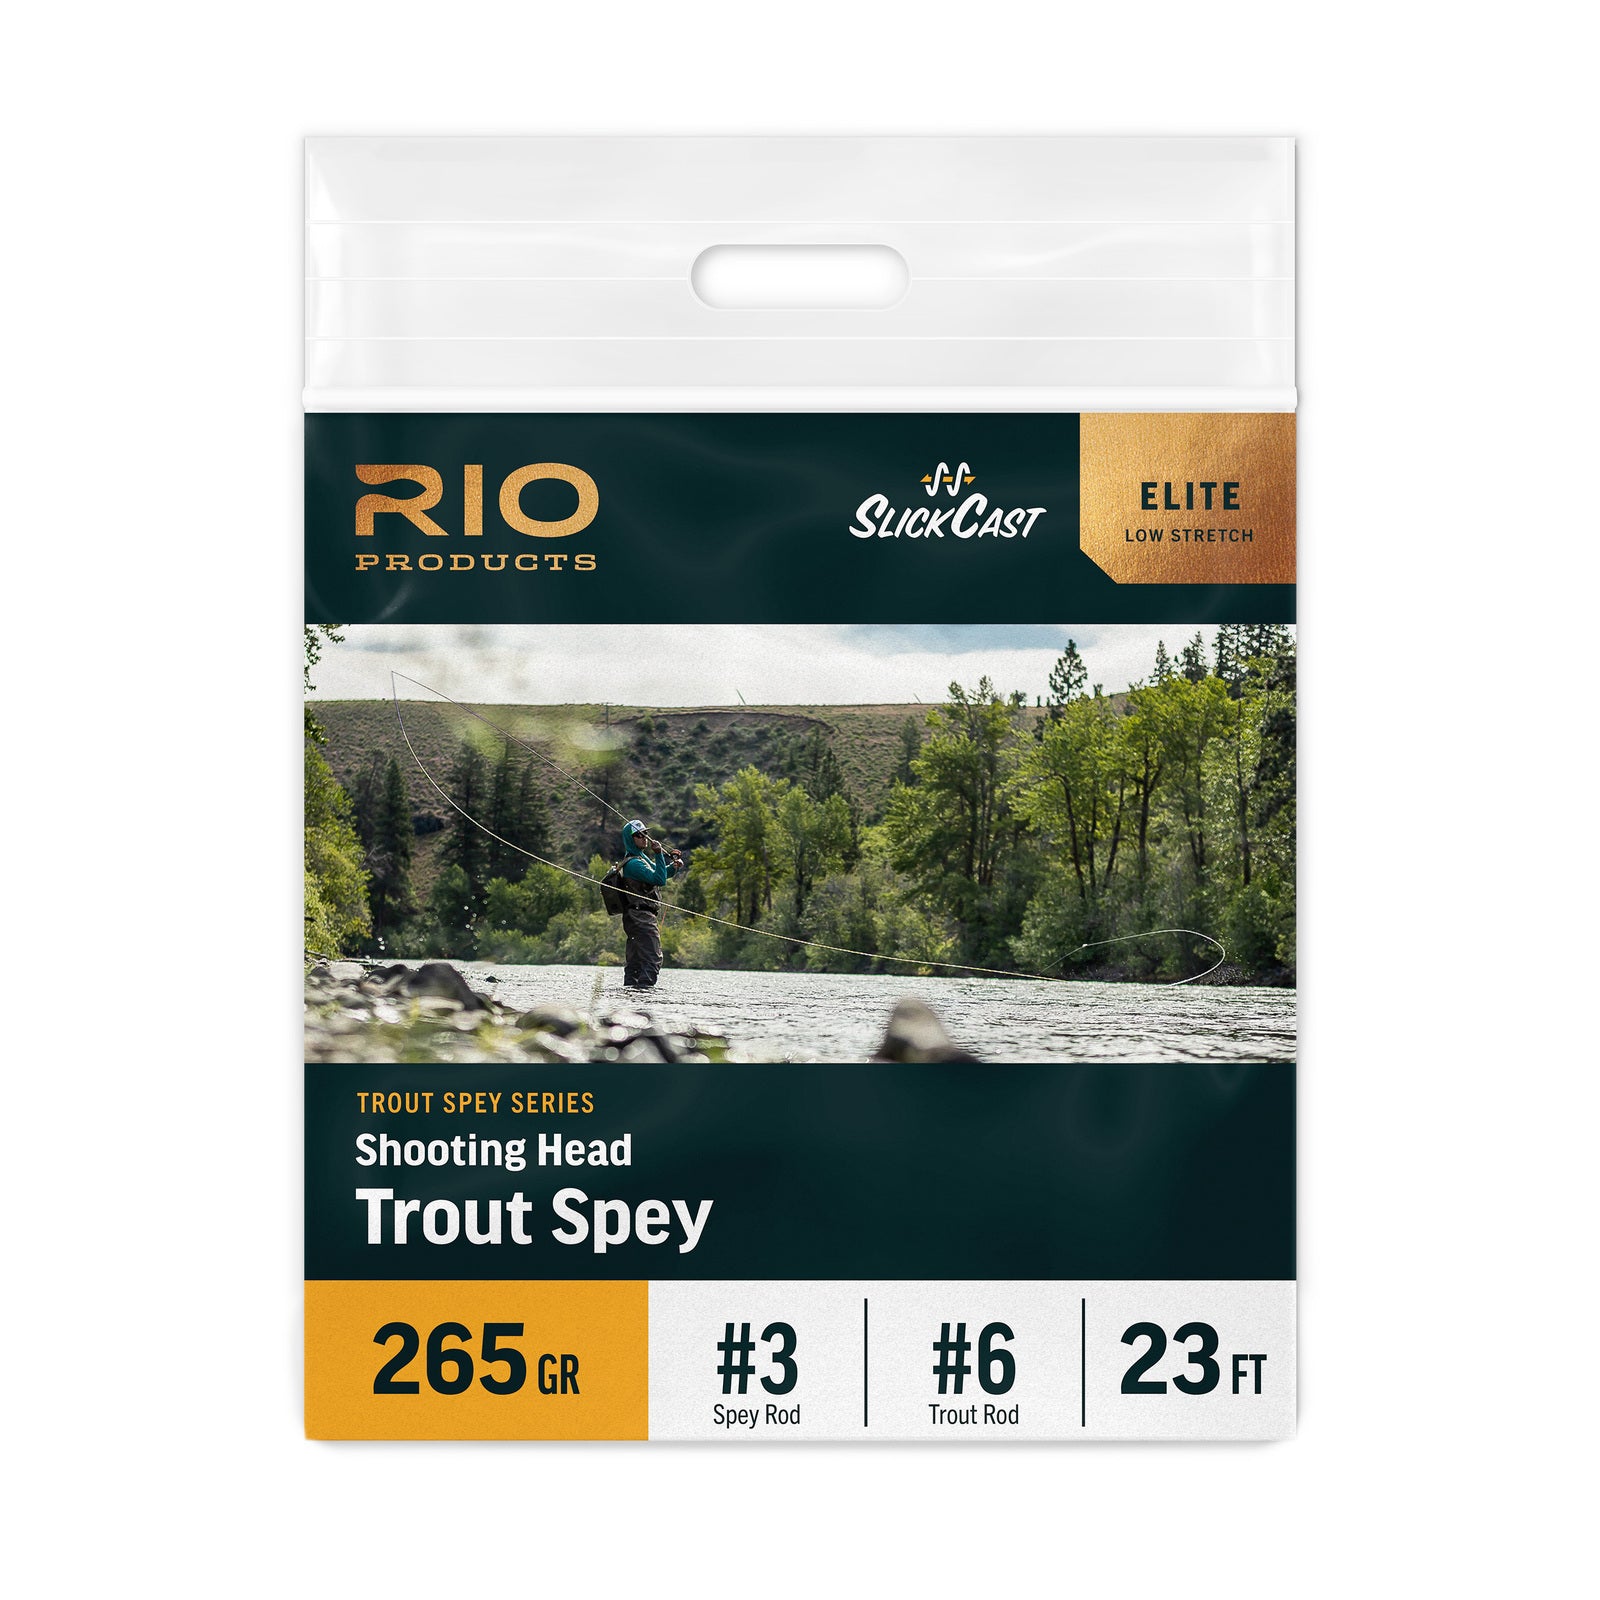 2021 Spey Write-ups from George Cook and Erik Johnson – Sage – RIO